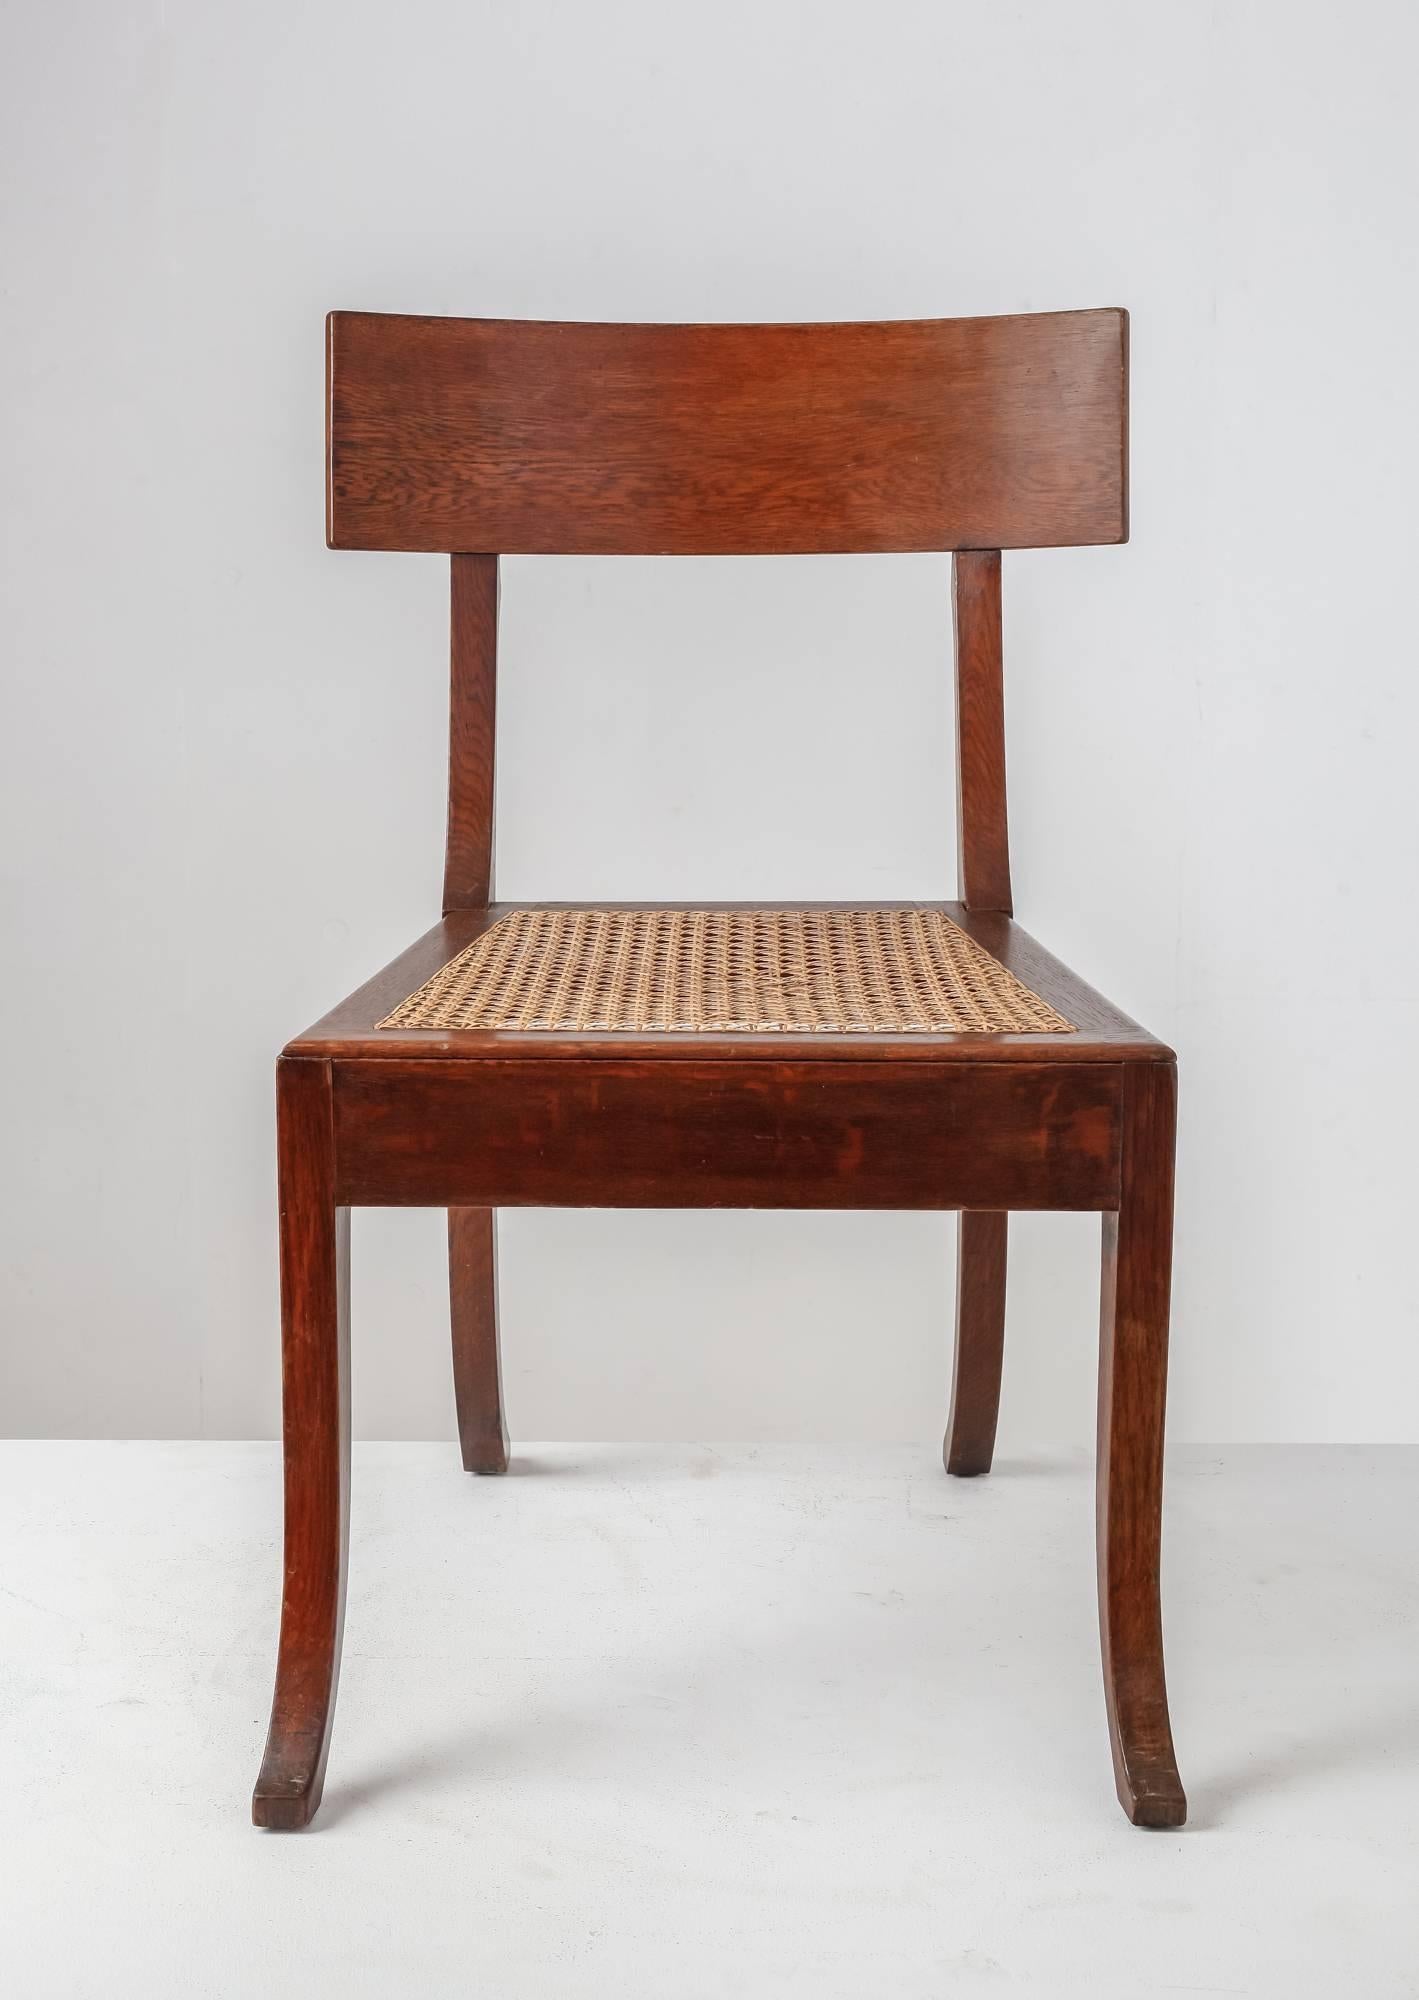 A large Klismos chair in oak by Danish architect Ole Peter Momme (1854-1899). It has a woven cane seating in an excellent condition. This chair was designed for The Roskilde city hall, built by Momme in 1883-1884. The design of the Klismos chair,